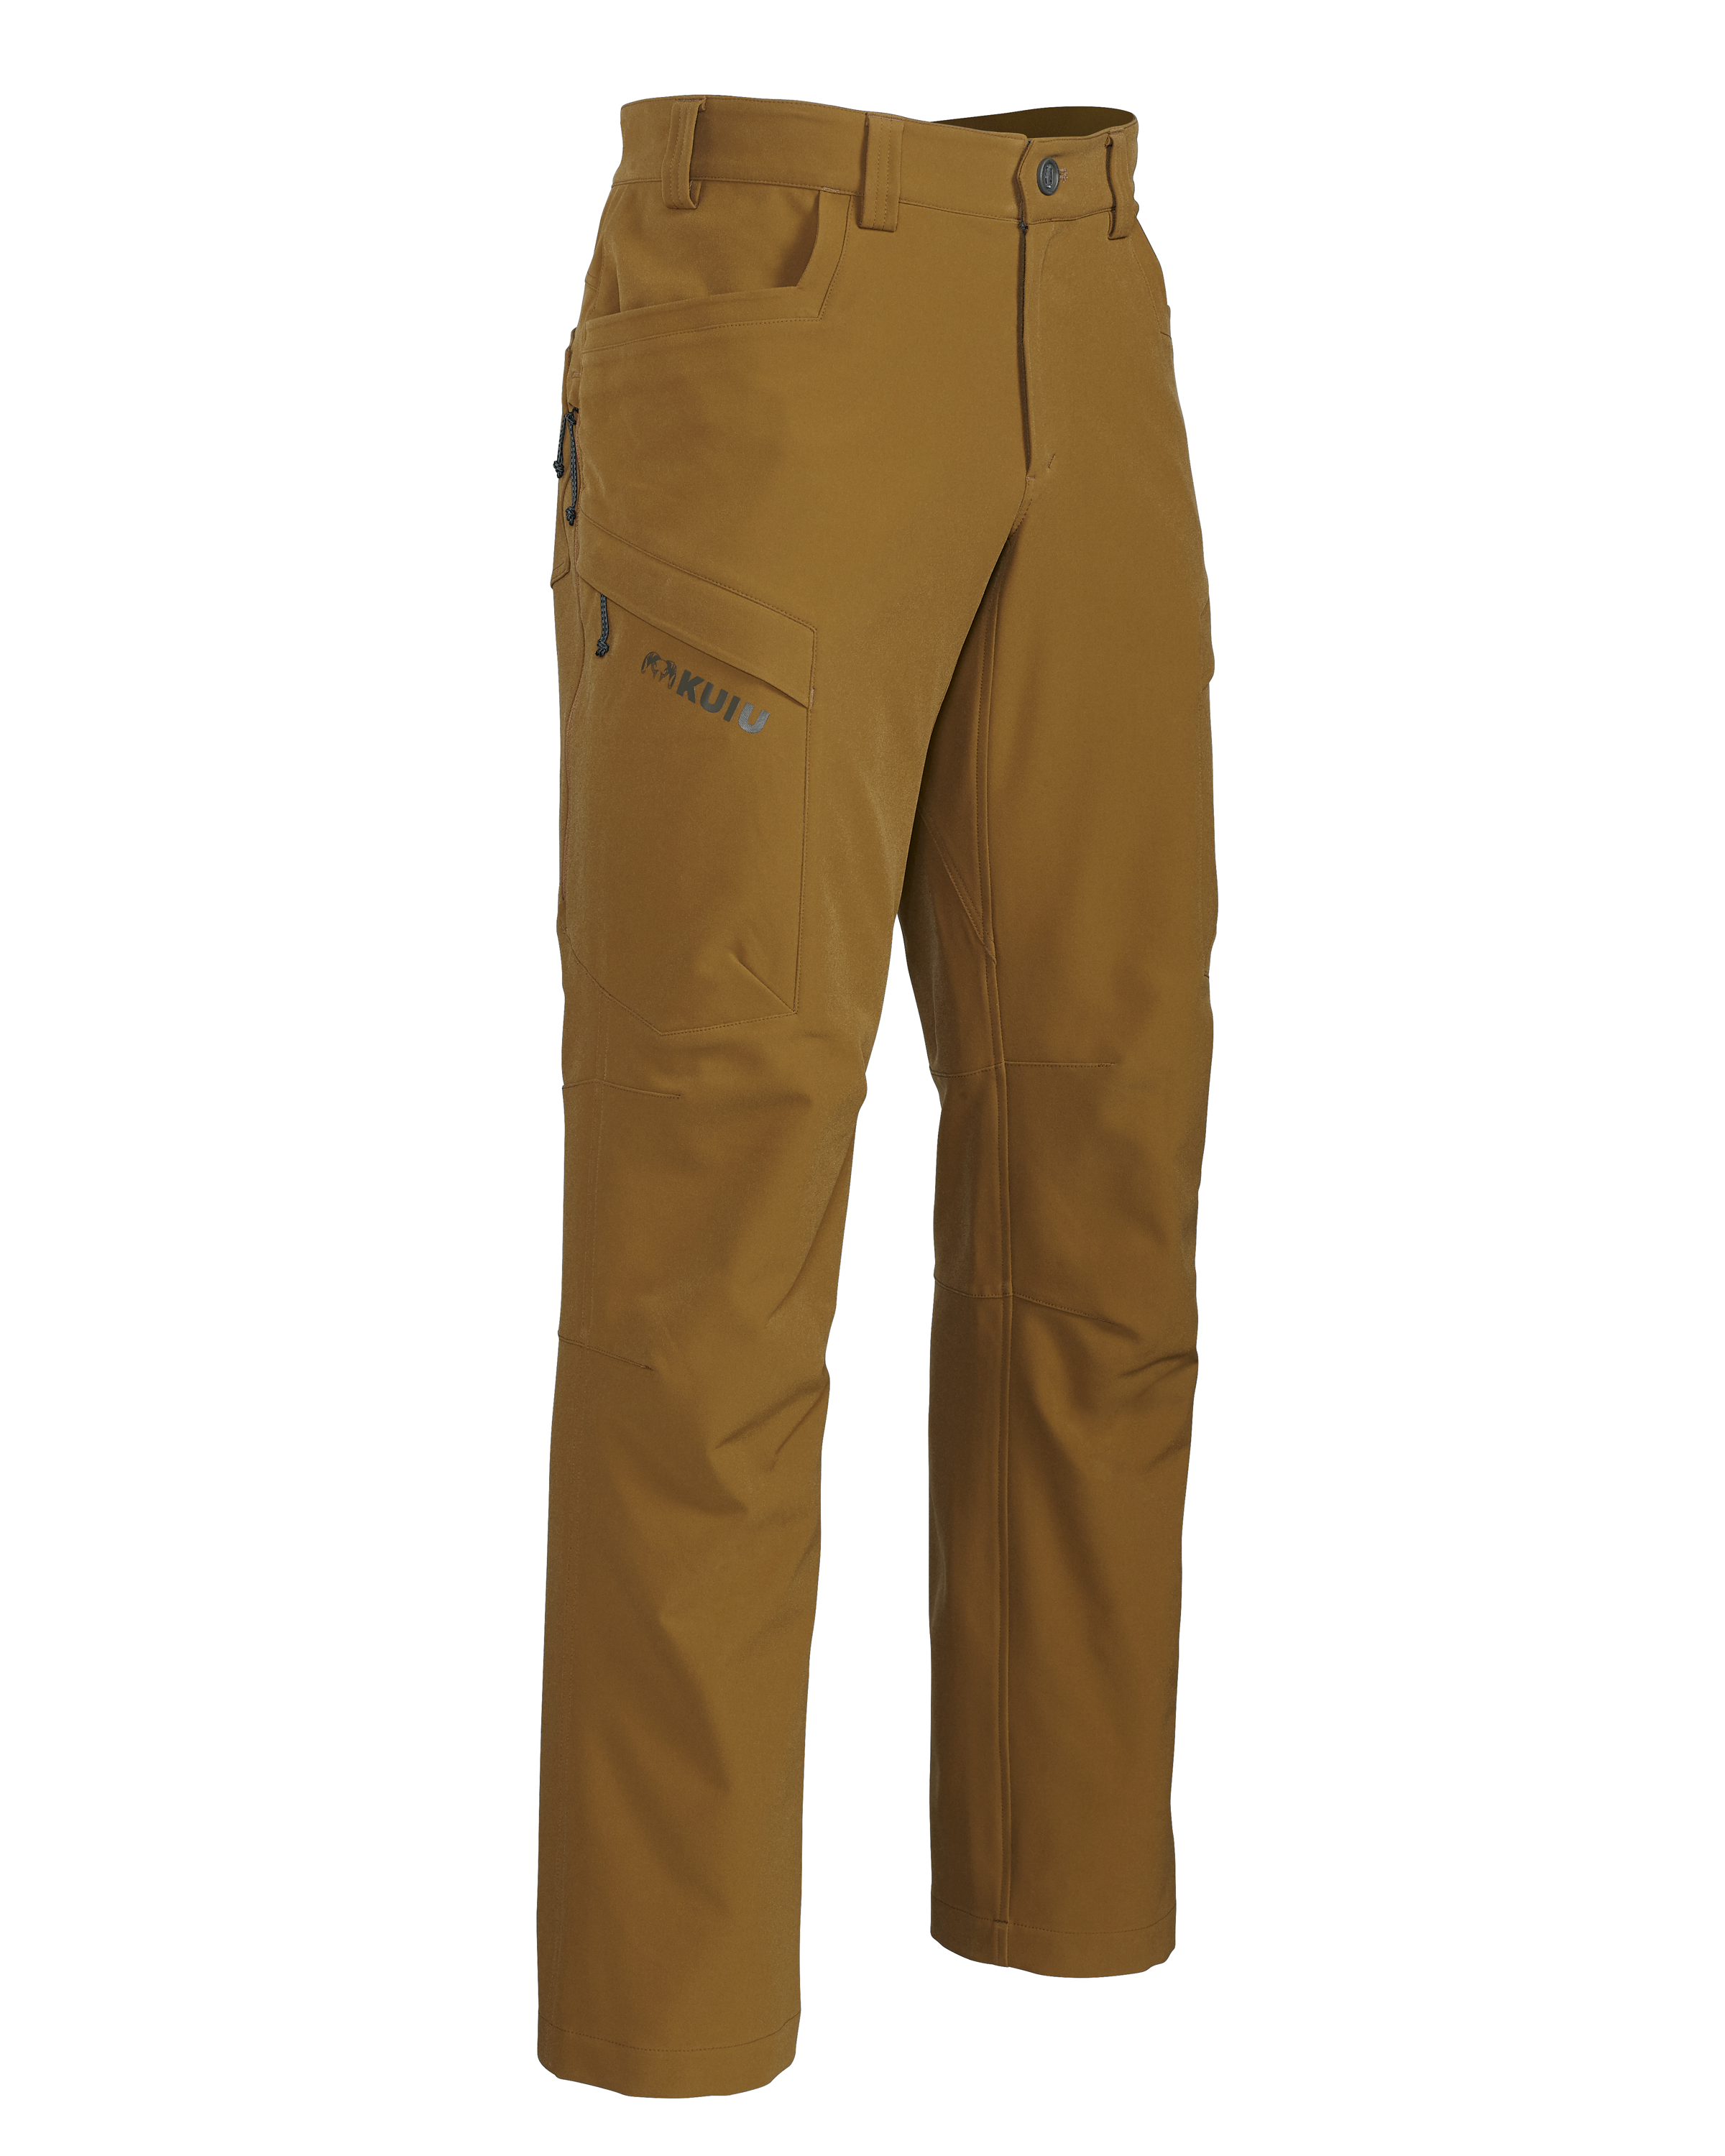 KUIU Outlet Attack Hunting Pant in Buckskin | Size 46